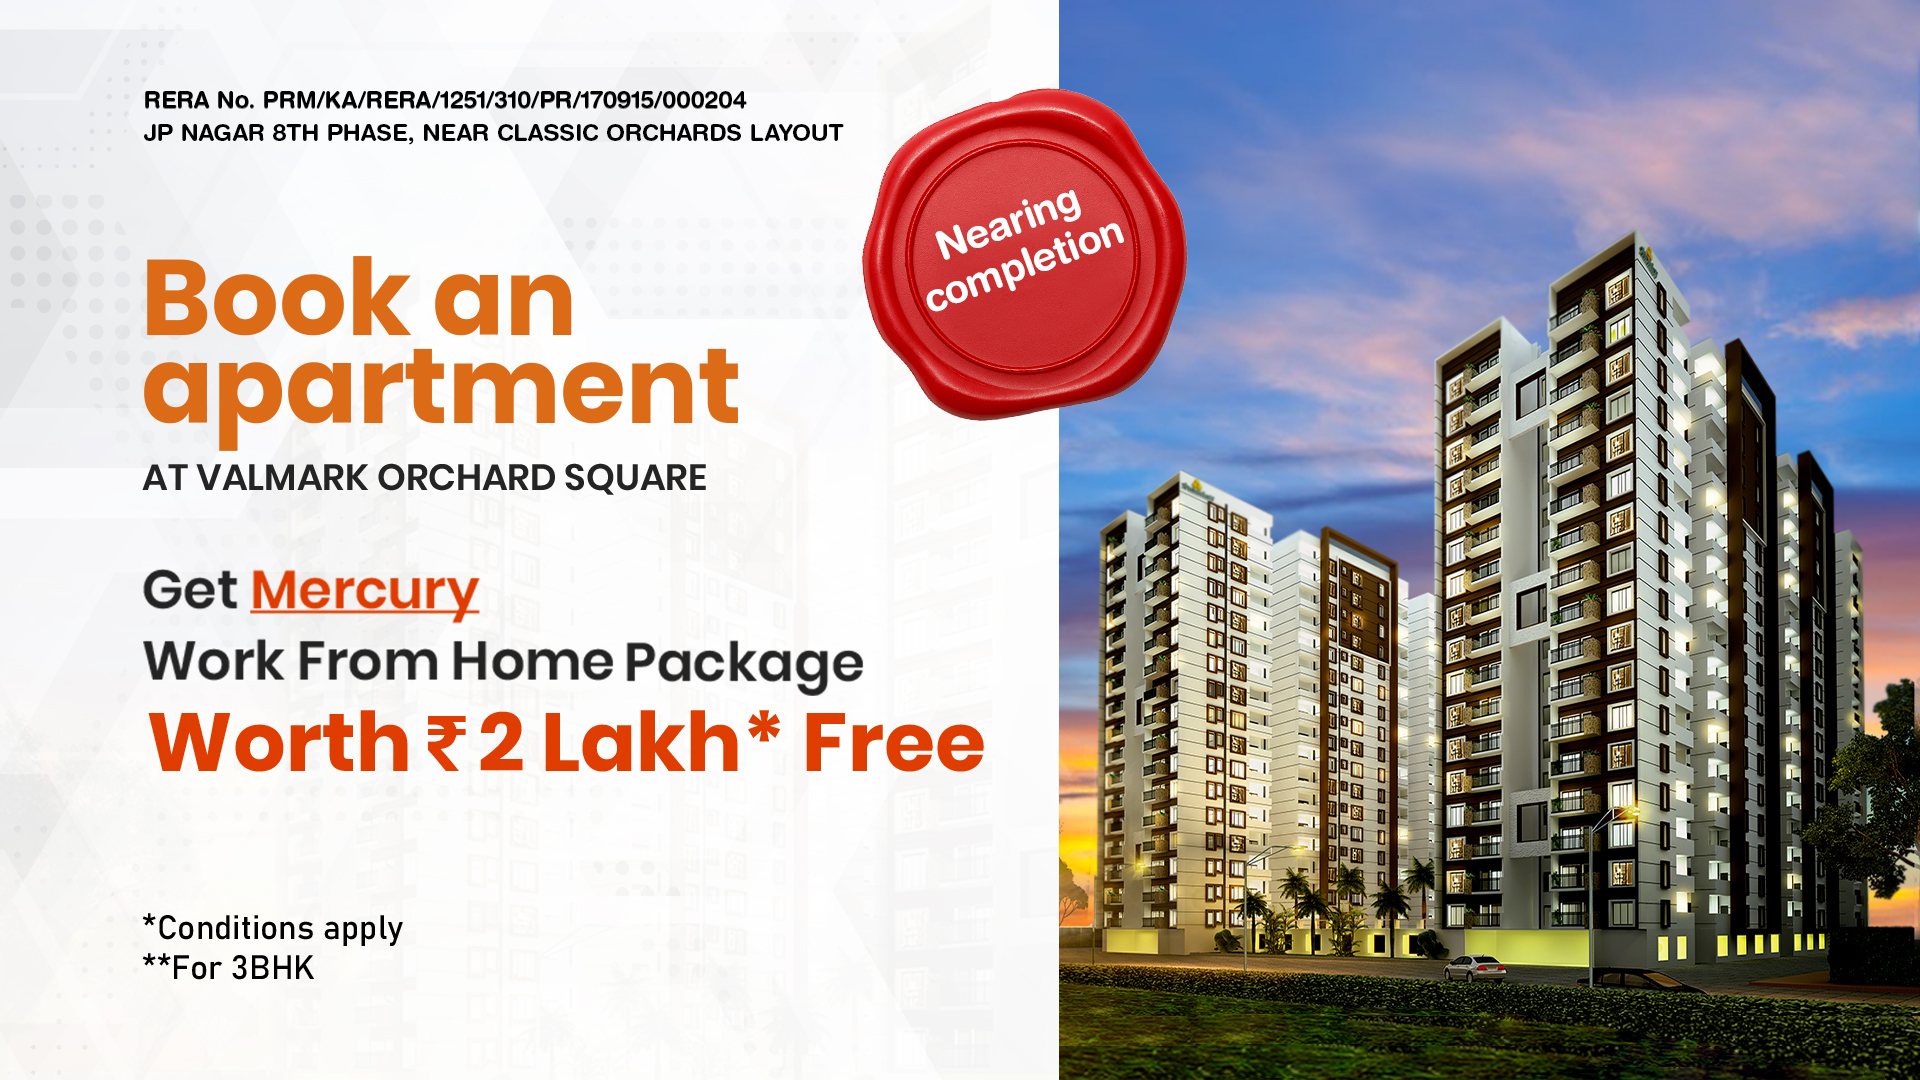 orchard square offer